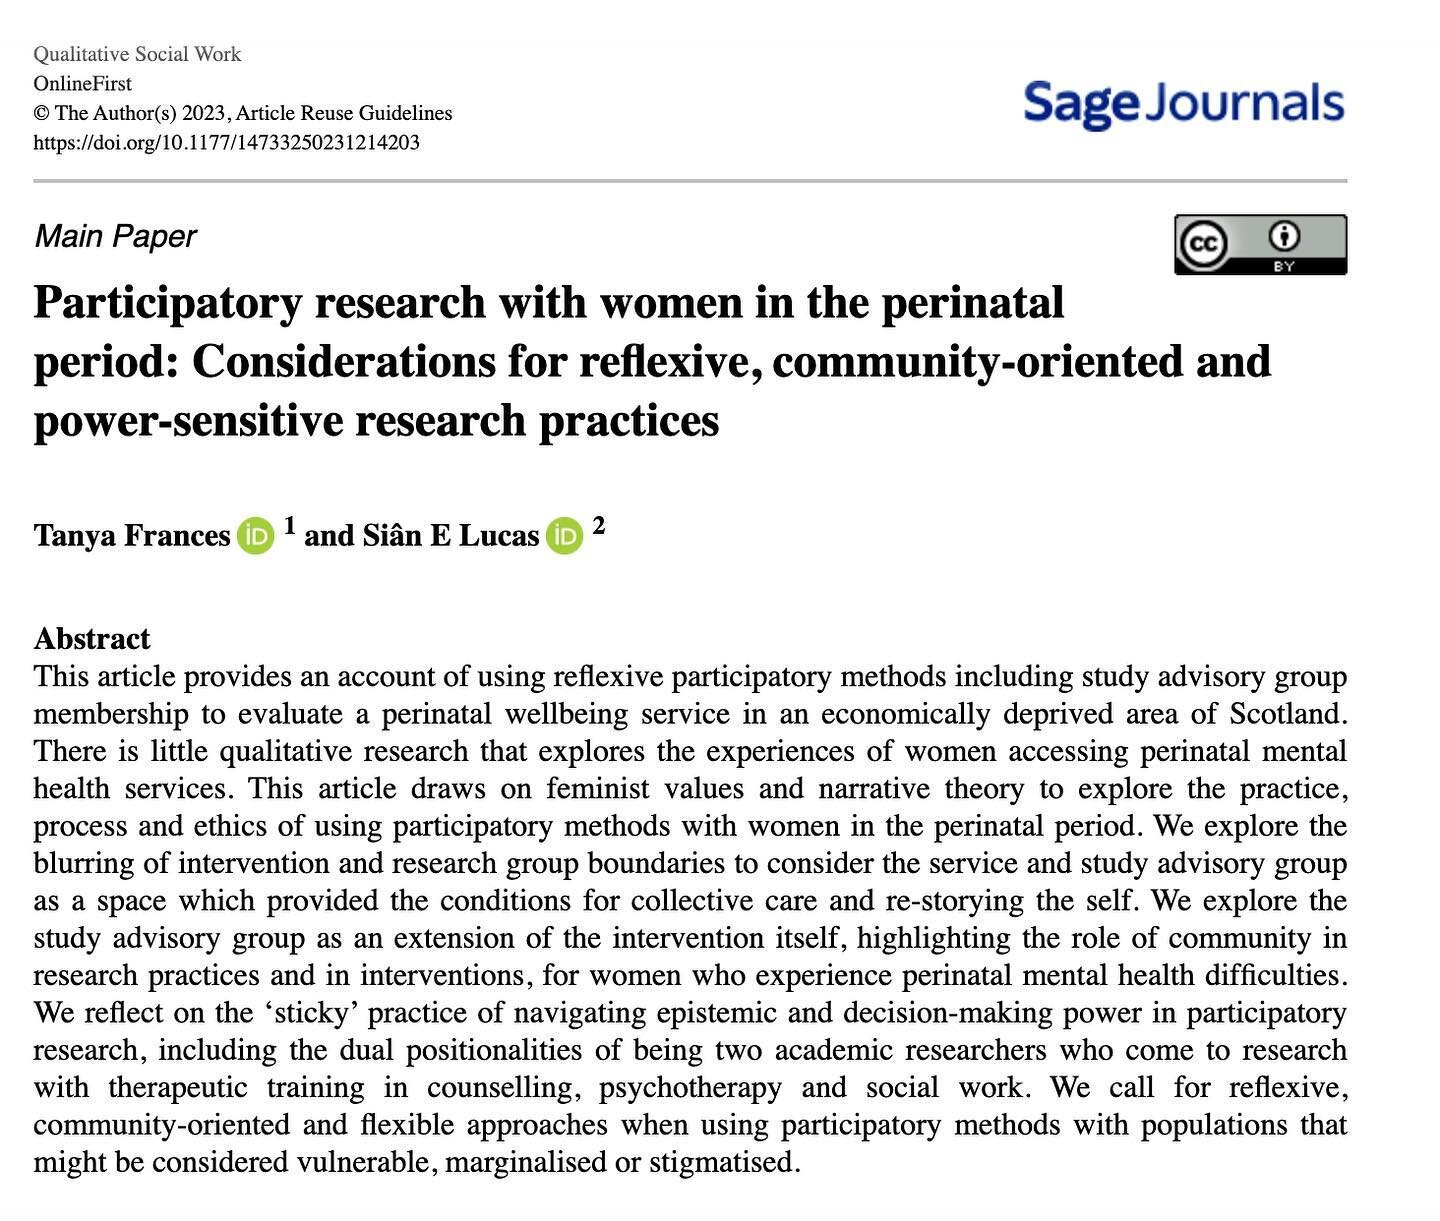 New publication day! 

Pleased to share this new paper where we draw on feminist values and narrative theory to reflect on the practices, processes and ethics of using participatory research methods with people who are highly likely to be considered 